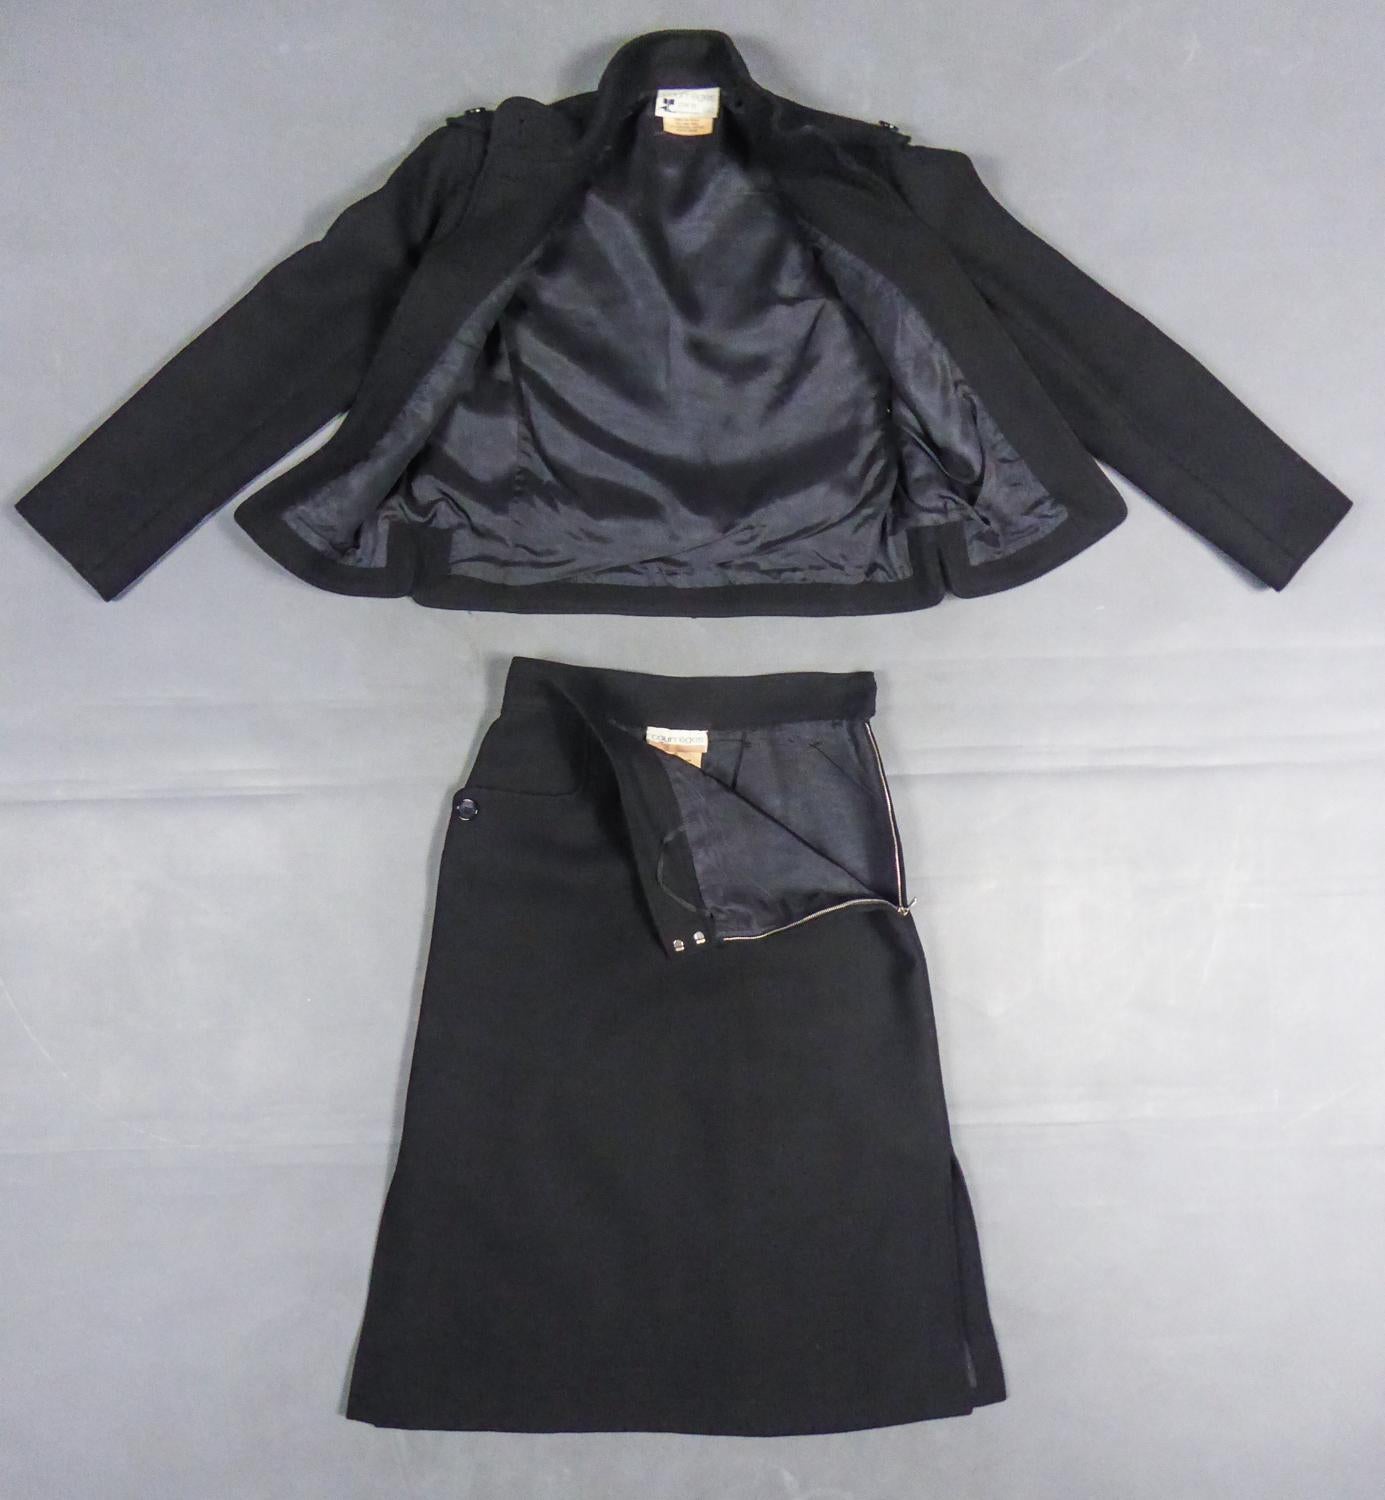 Circa 1968/1975

France

Gorgeous Modernist skirt suit by André Courrèges Haute Couture size 00 from 1968/1975. Fine combed wool set with twill ribs and stitching. Military-inspired futuristic cut with Mao collar, buttoned clip on the shoulders and